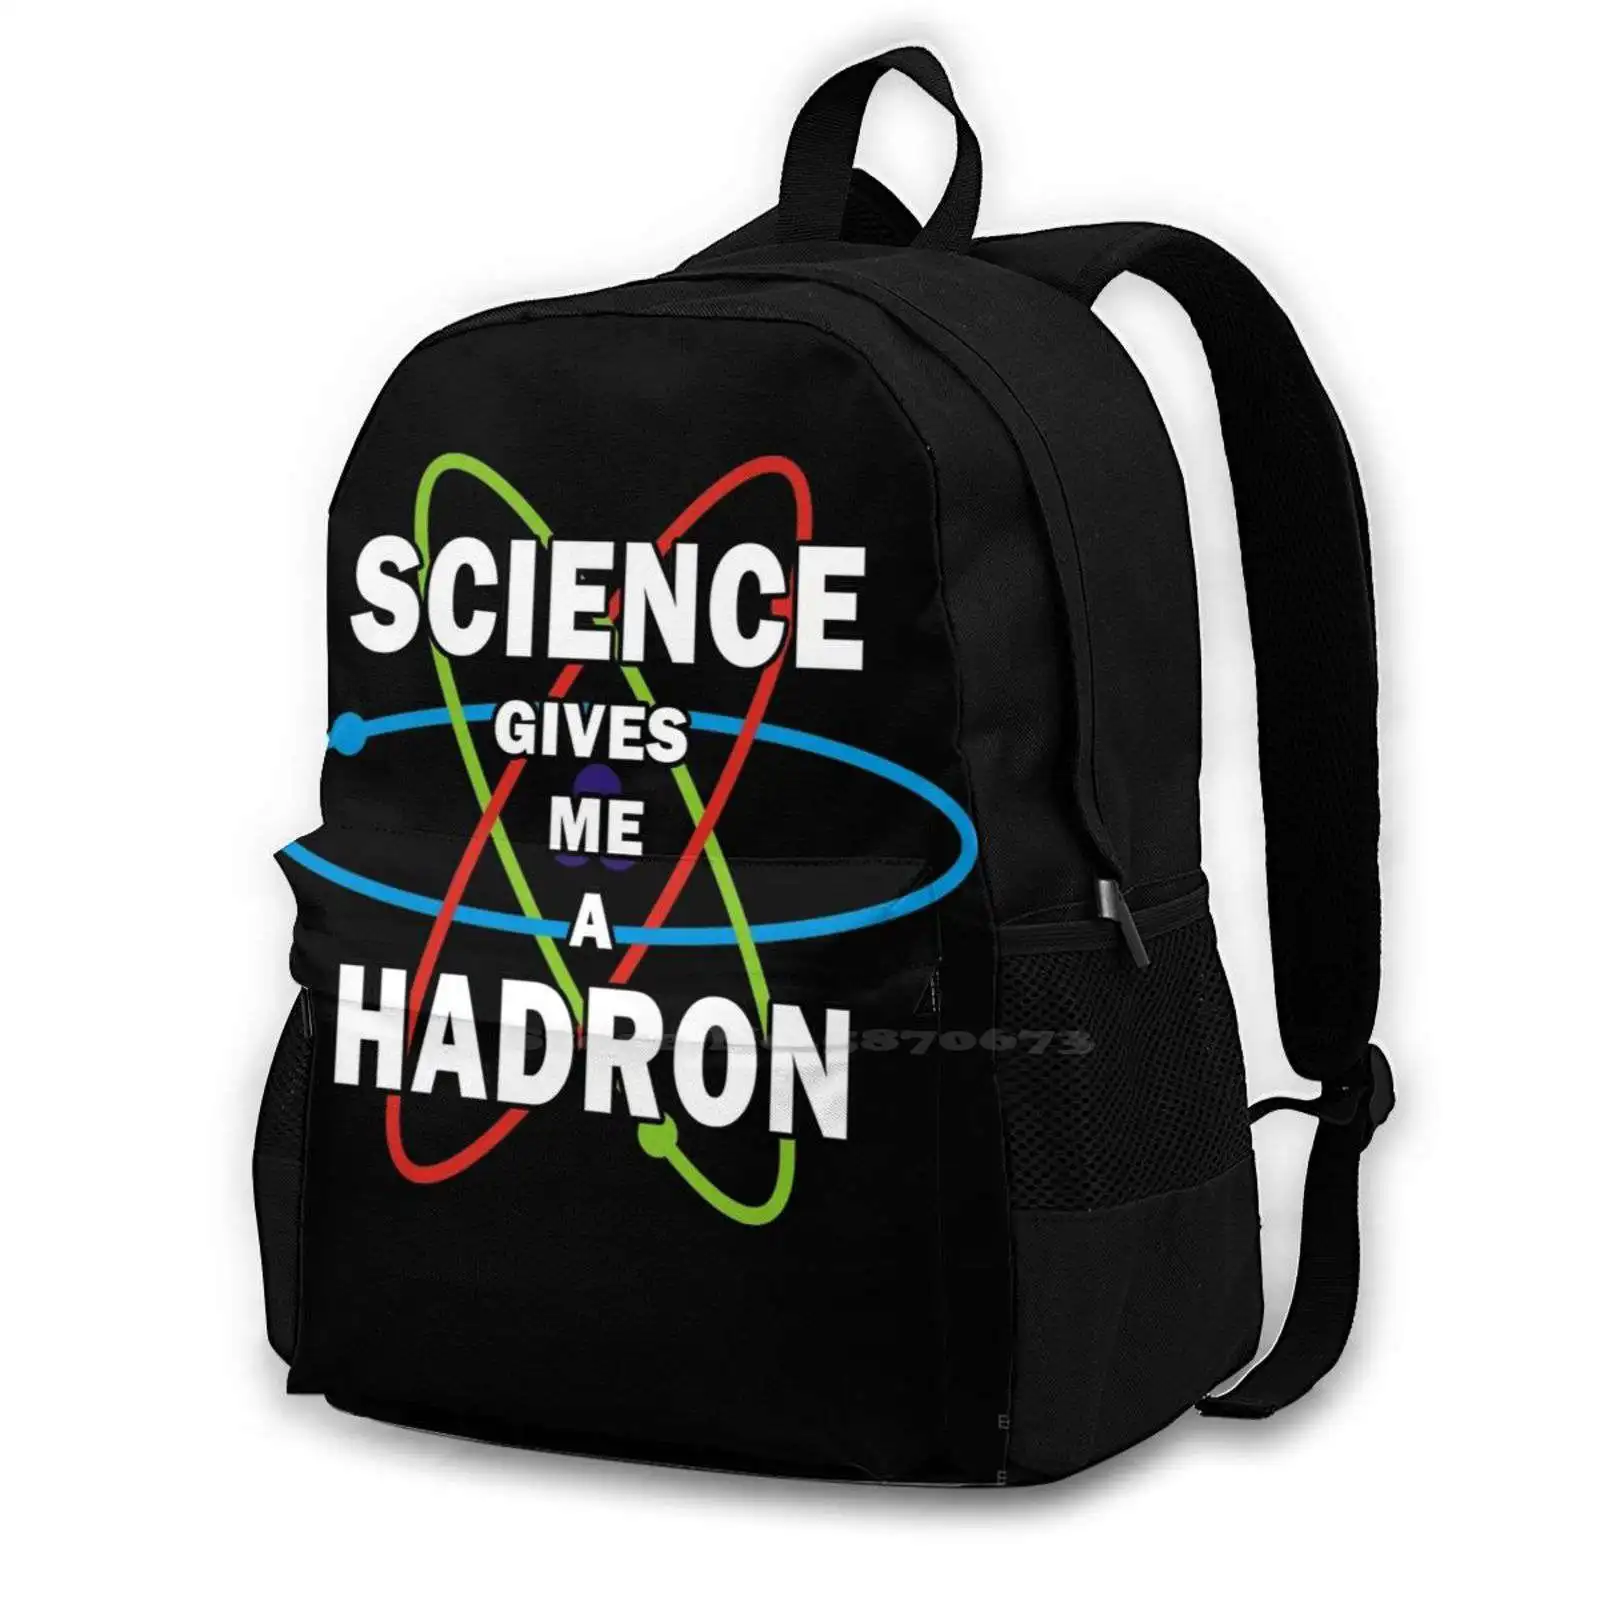 

Funny Science Humor Hadron Physics Physicist Geek Nerd School Bags For Teenage Girls Laptop Travel Bags Science Funny Science